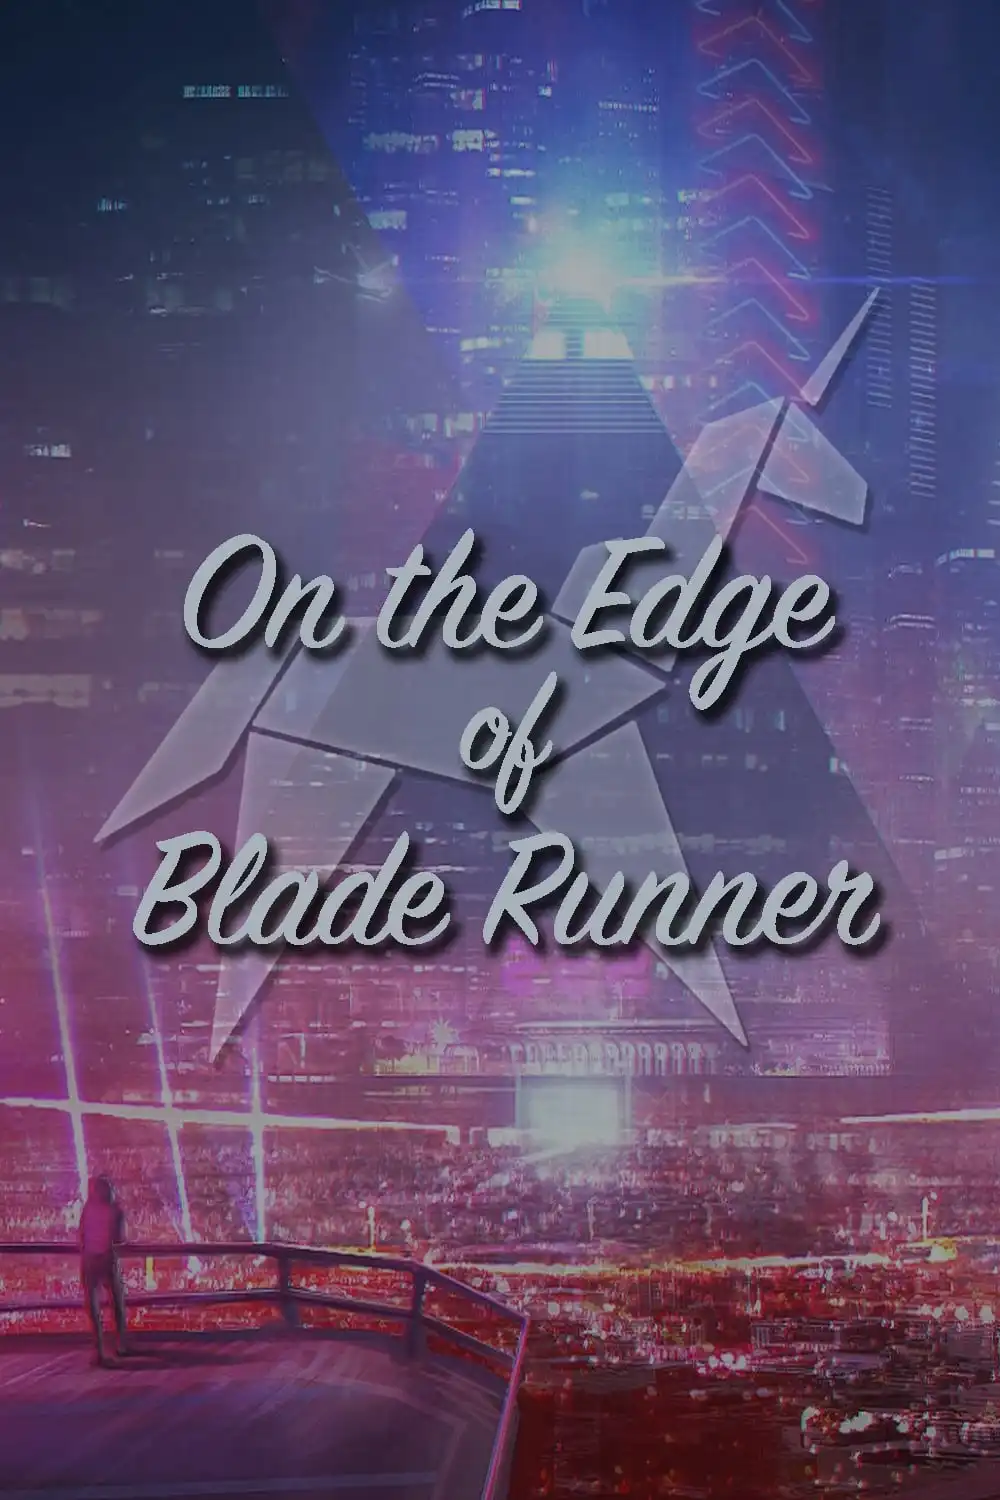 Watch and Download On the Edge of 'Blade Runner' 5